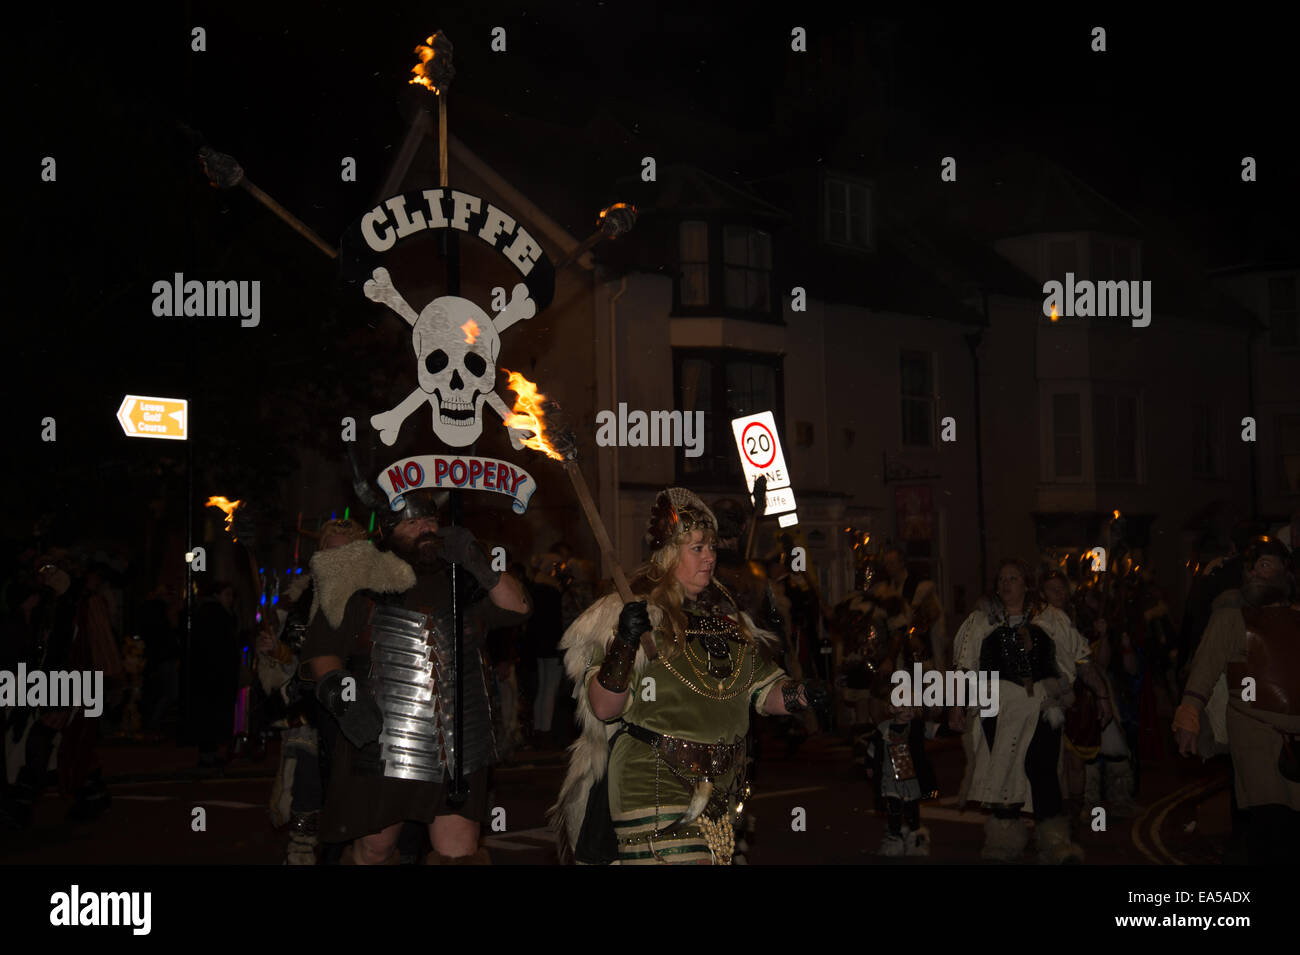 Lewes.Cliffe Bonfire Society. A group including a woman in a Viking costume and a man carrying a banner saying 'No Popery'. Stock Photo